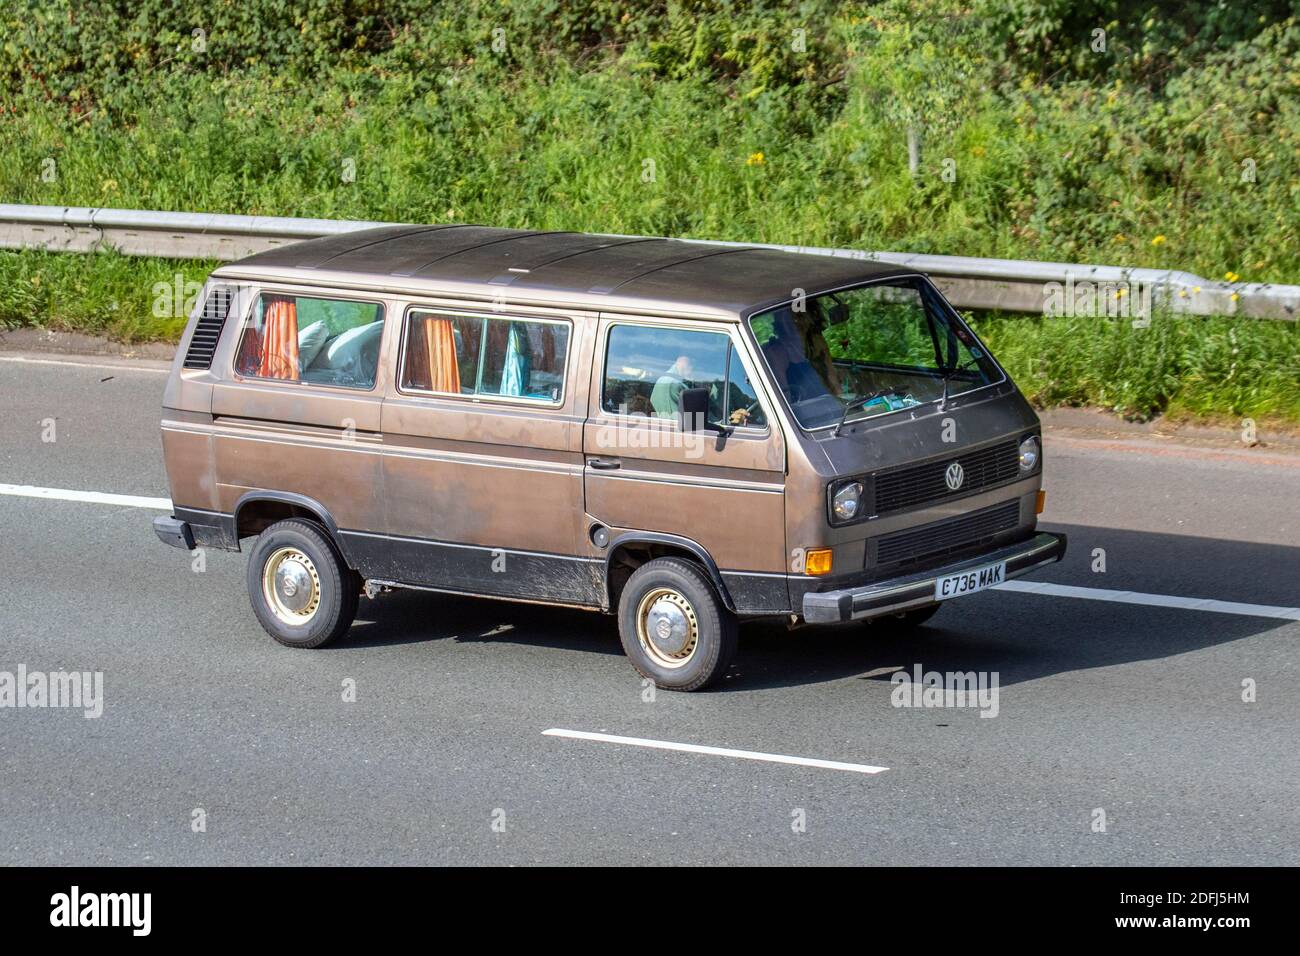 1986 80s eighties brown VW Volkswagen Caravelle 78Ps campervan Caravans and Motorhomes, 80s campervans on Britain's roads, RV leisure vehicle, family holidays, caravanette vacations, Touring caravan holiday, van conversions, Vanagon auto home, life on the road UK Stock Photo